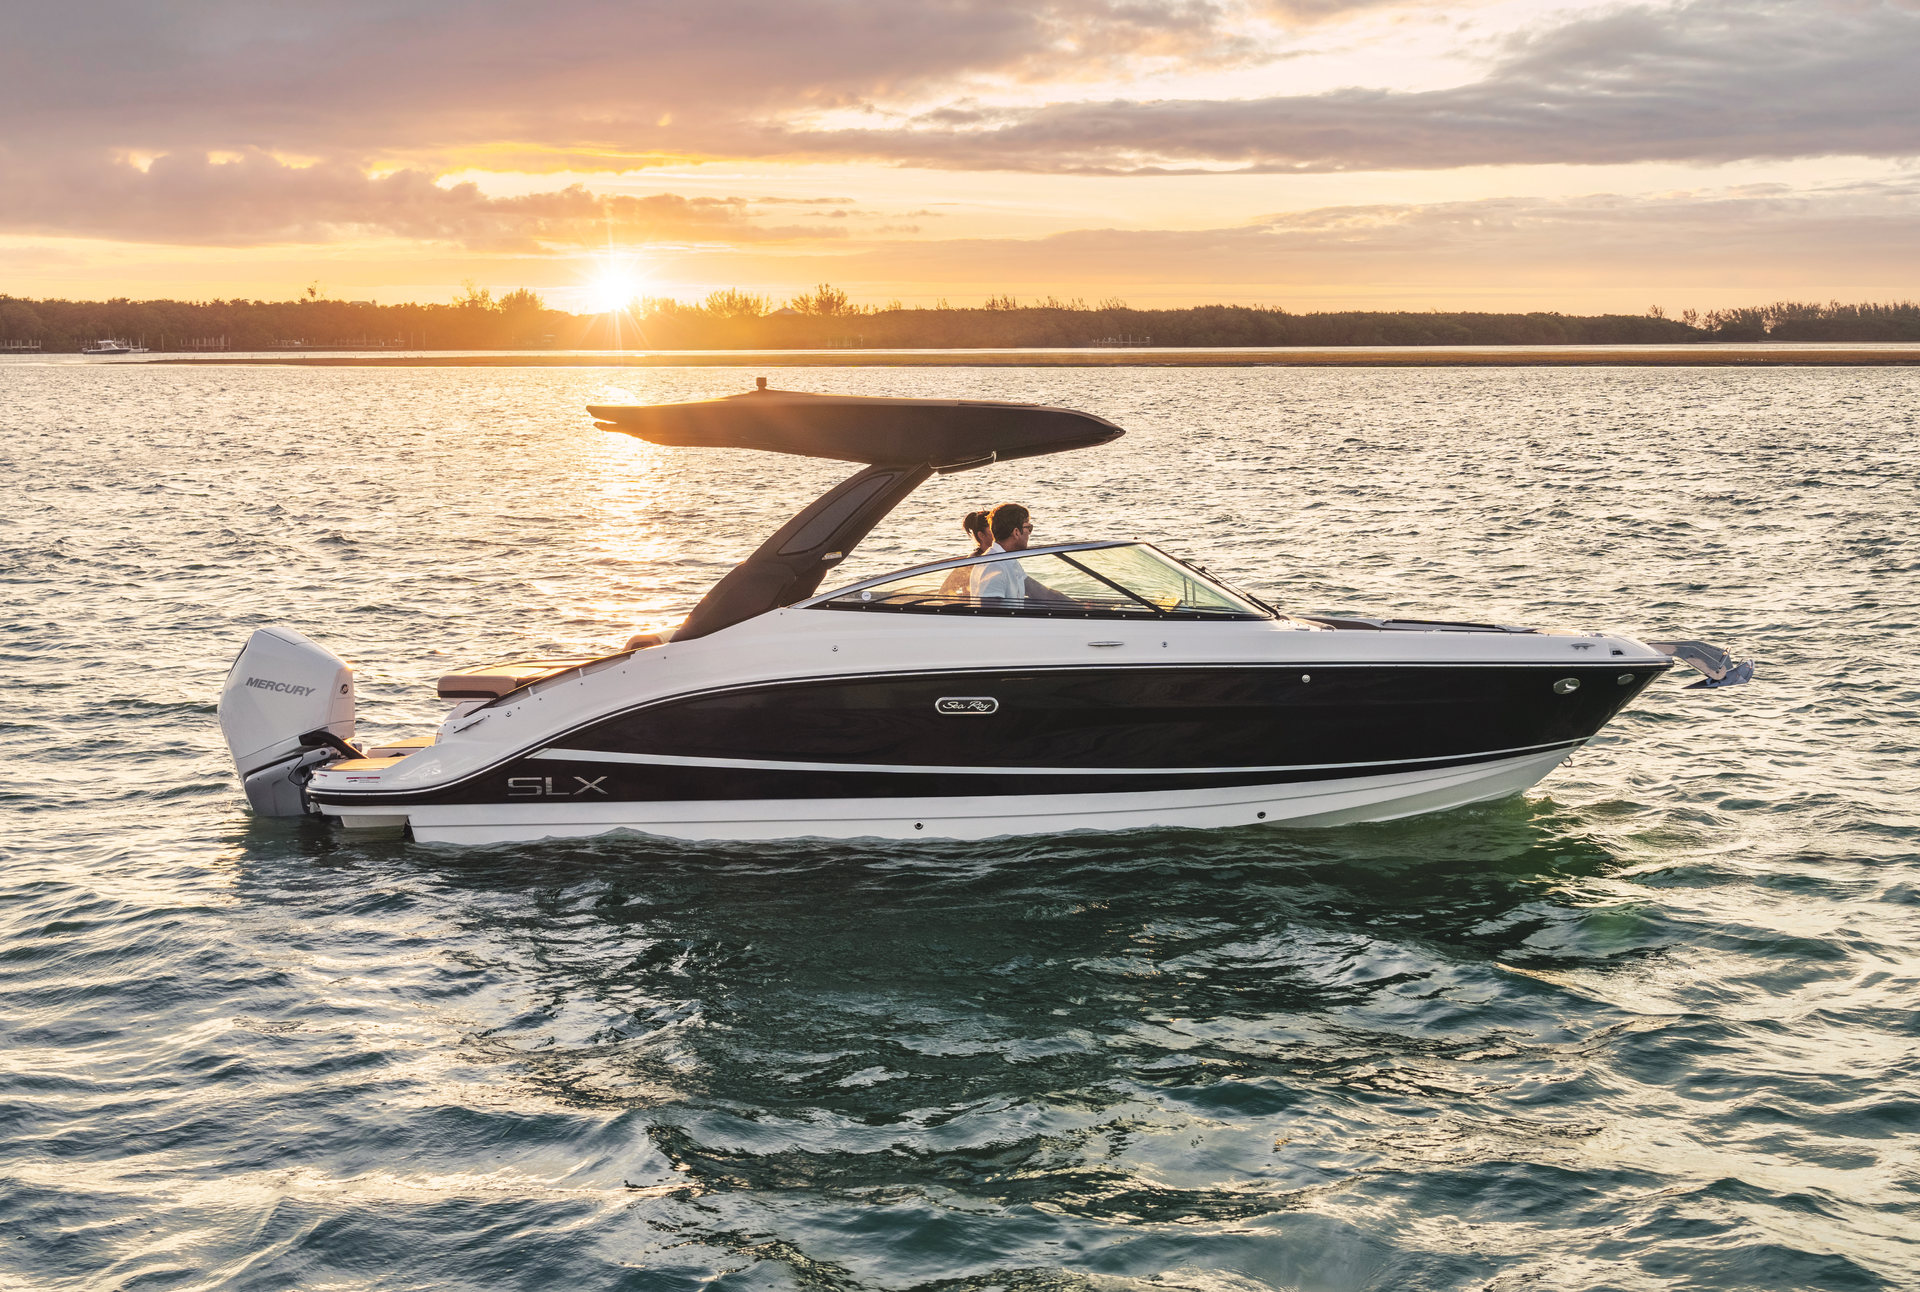 360 VR Virtual Tours of the Sea Ray SLX 260 Outboard